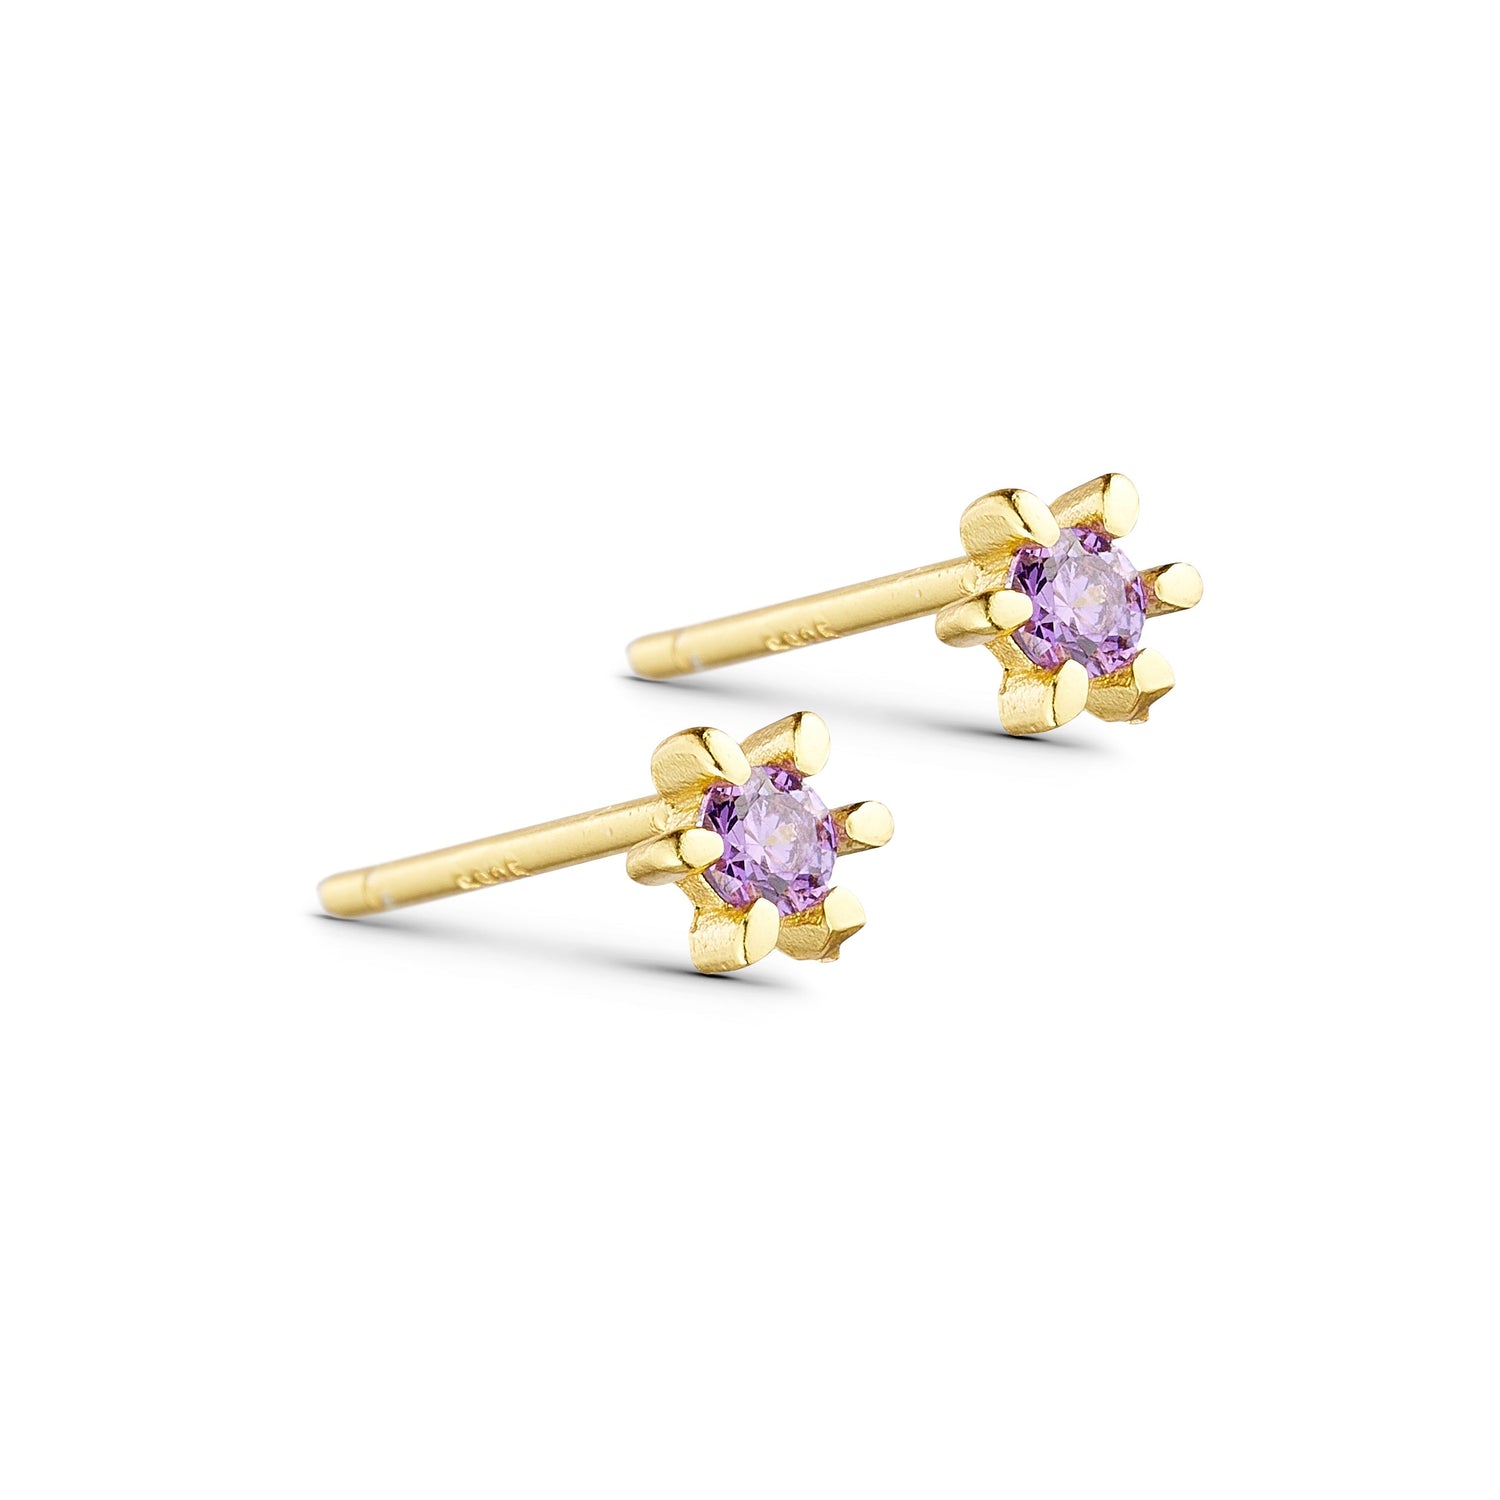 EVE - Stud Earrings - Sterling Silver - Gold Plated - Violet CZ